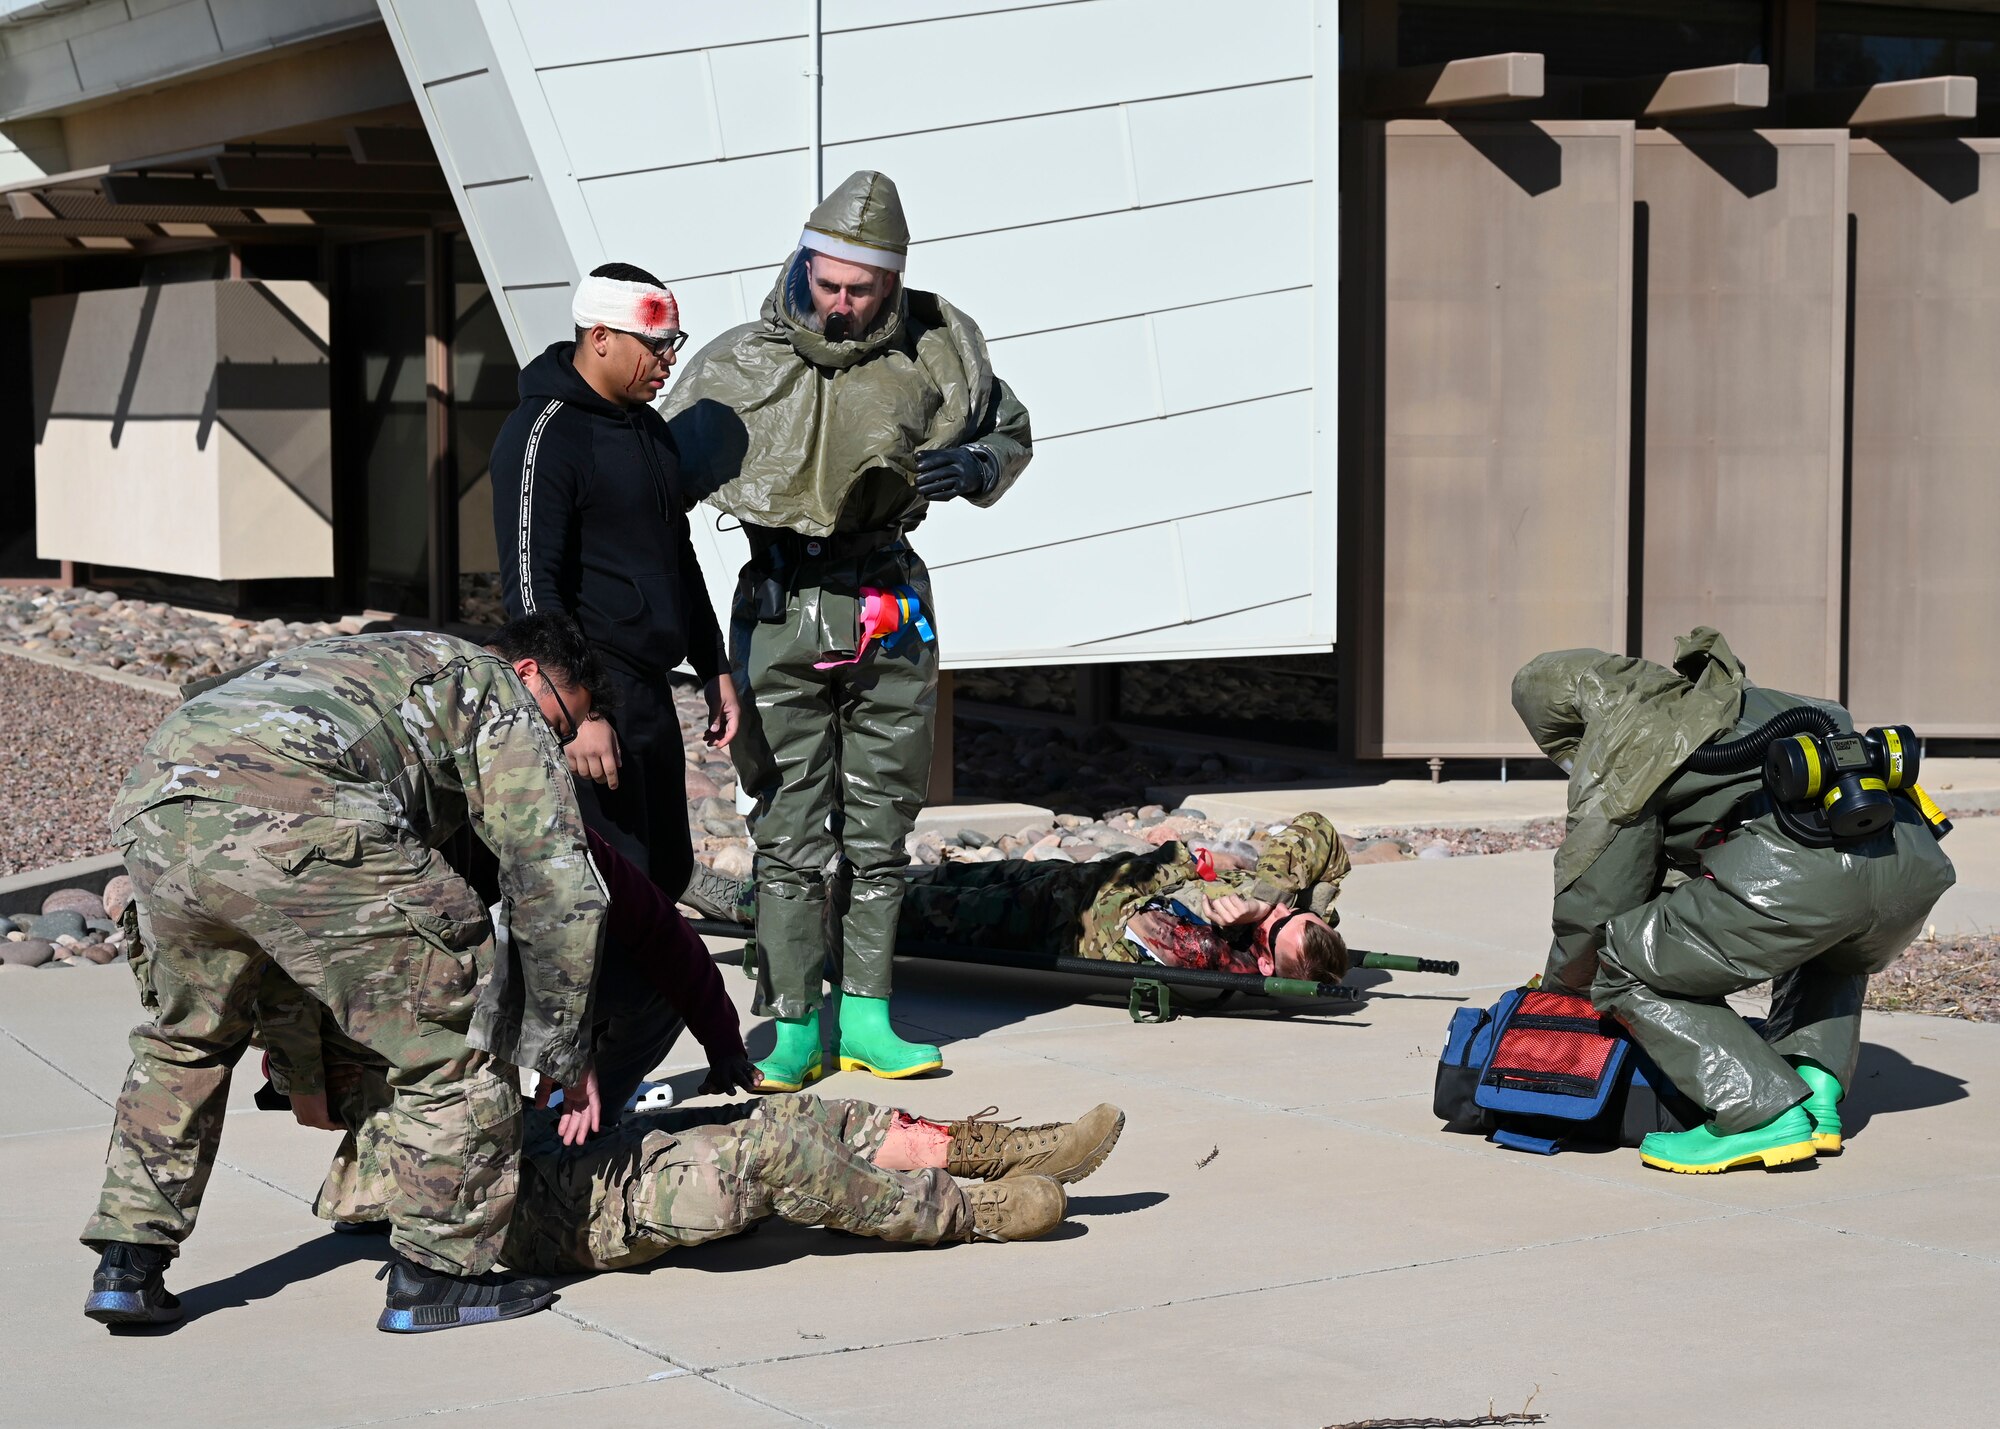 Airmen provide treatment to simulated casualties during a mass casualty training exercise at Davis-Monthan Air Force Base